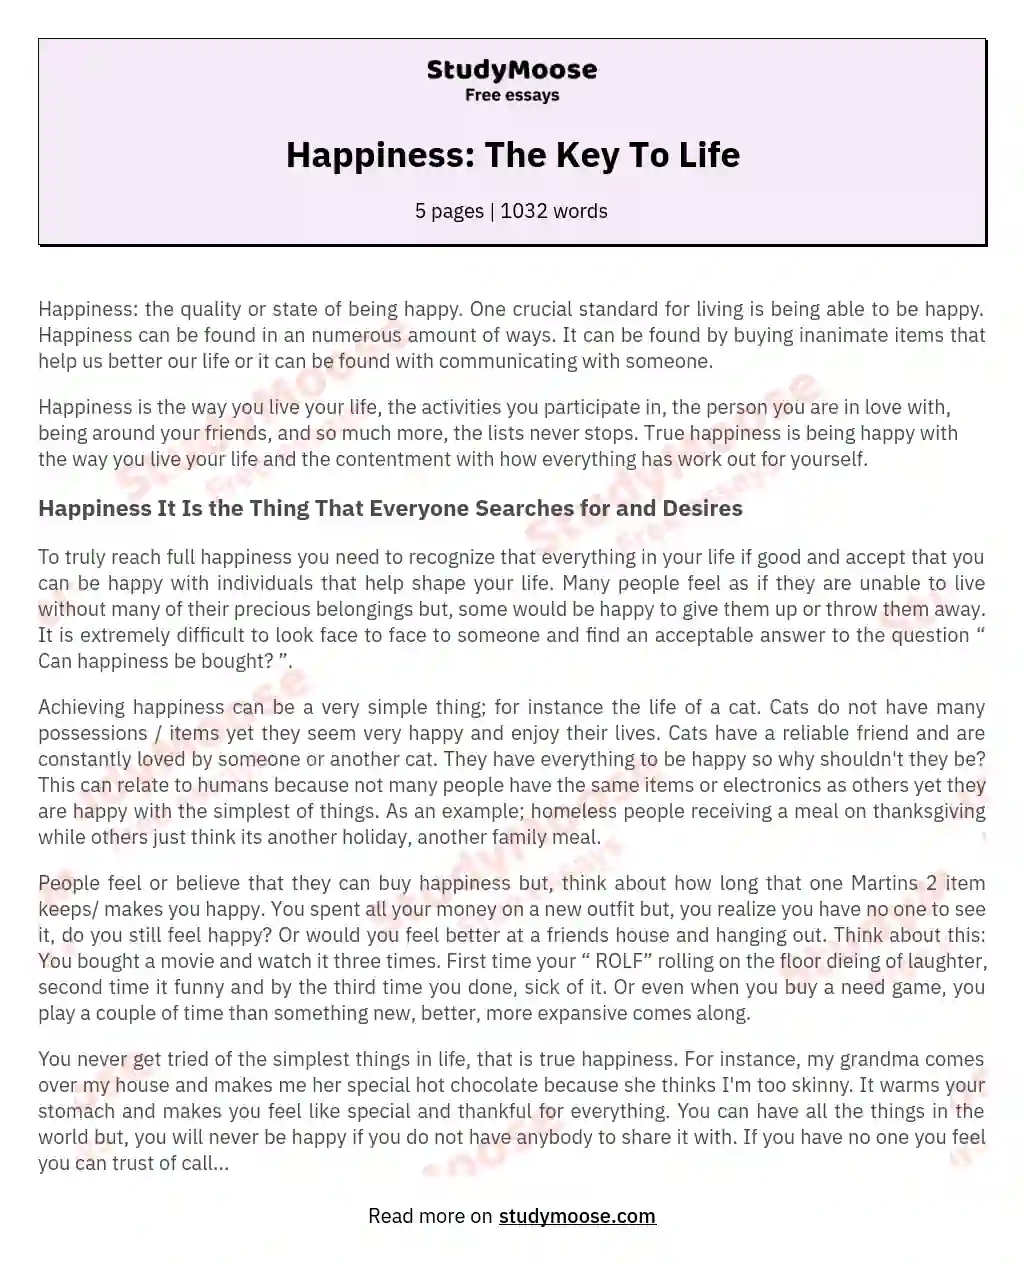 Happiness: The Key To Life essay